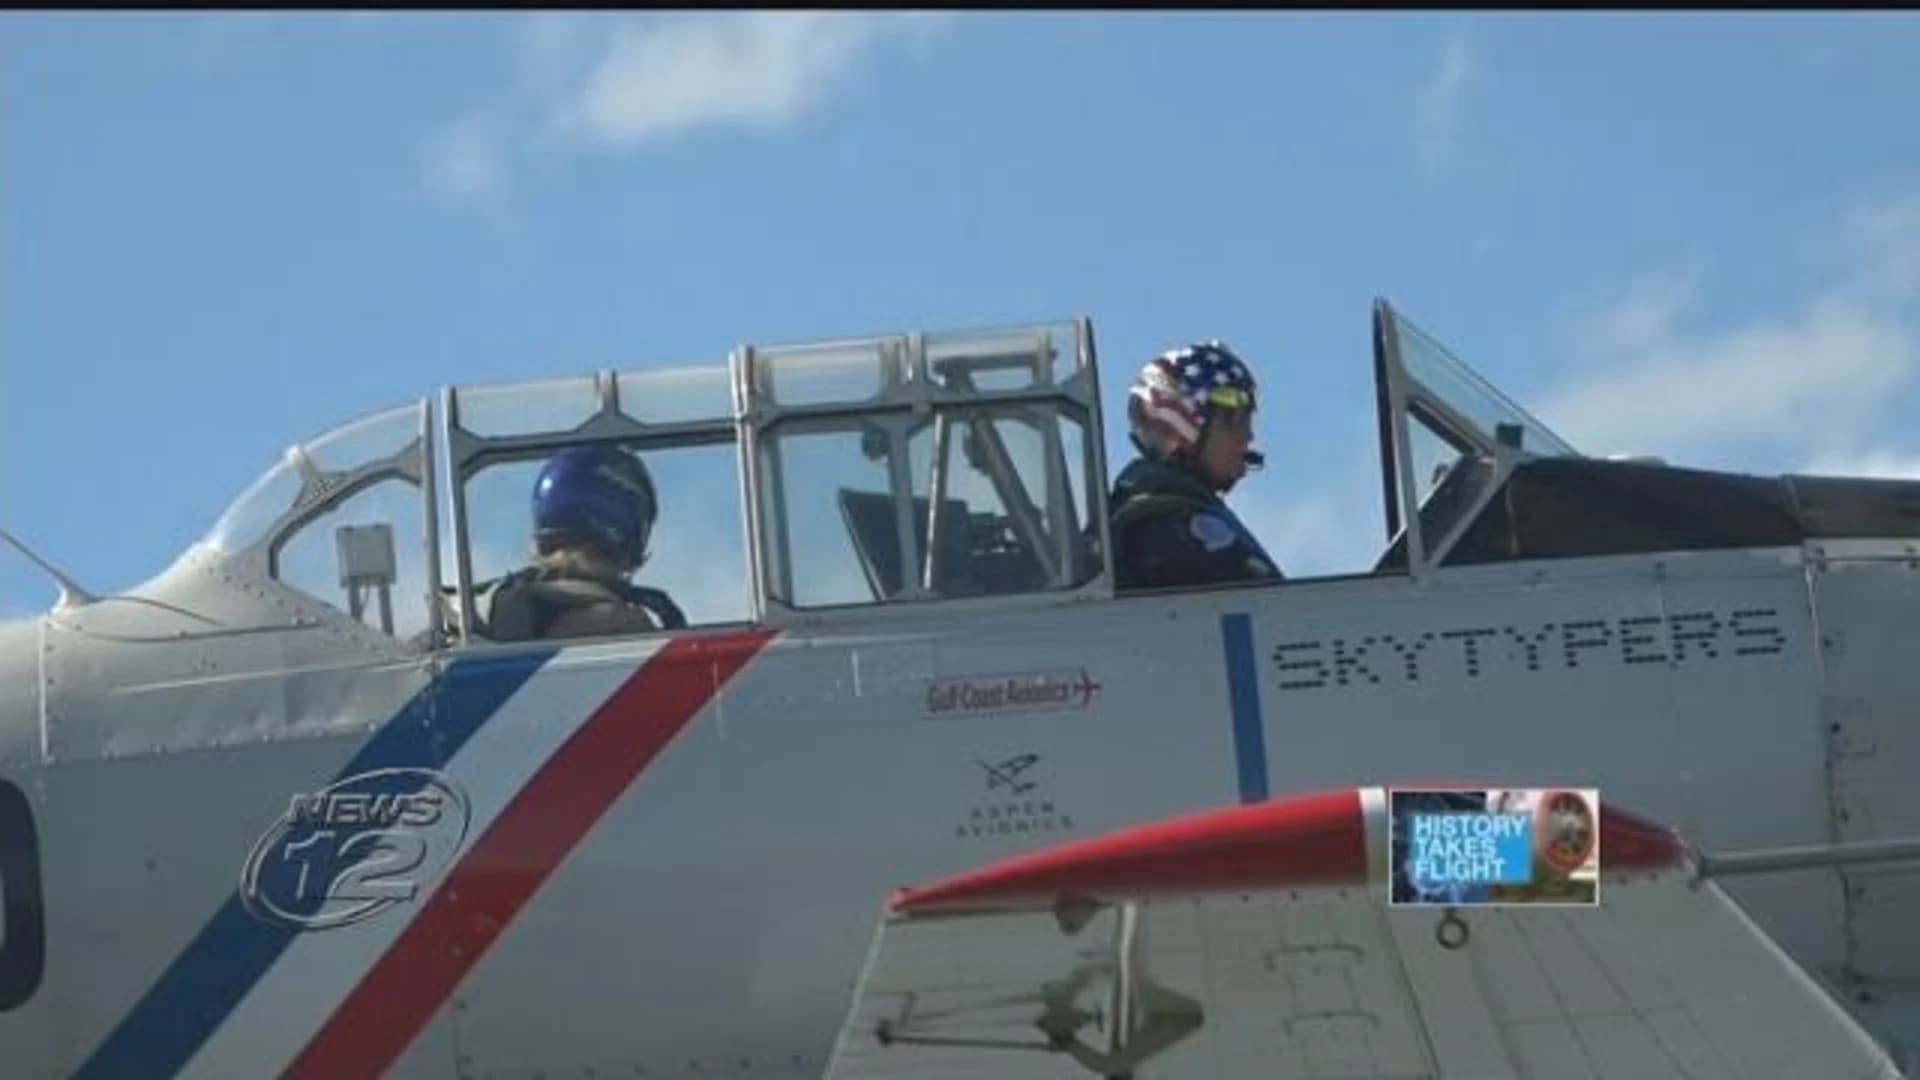 History takes flight at the Bethpage Air Show